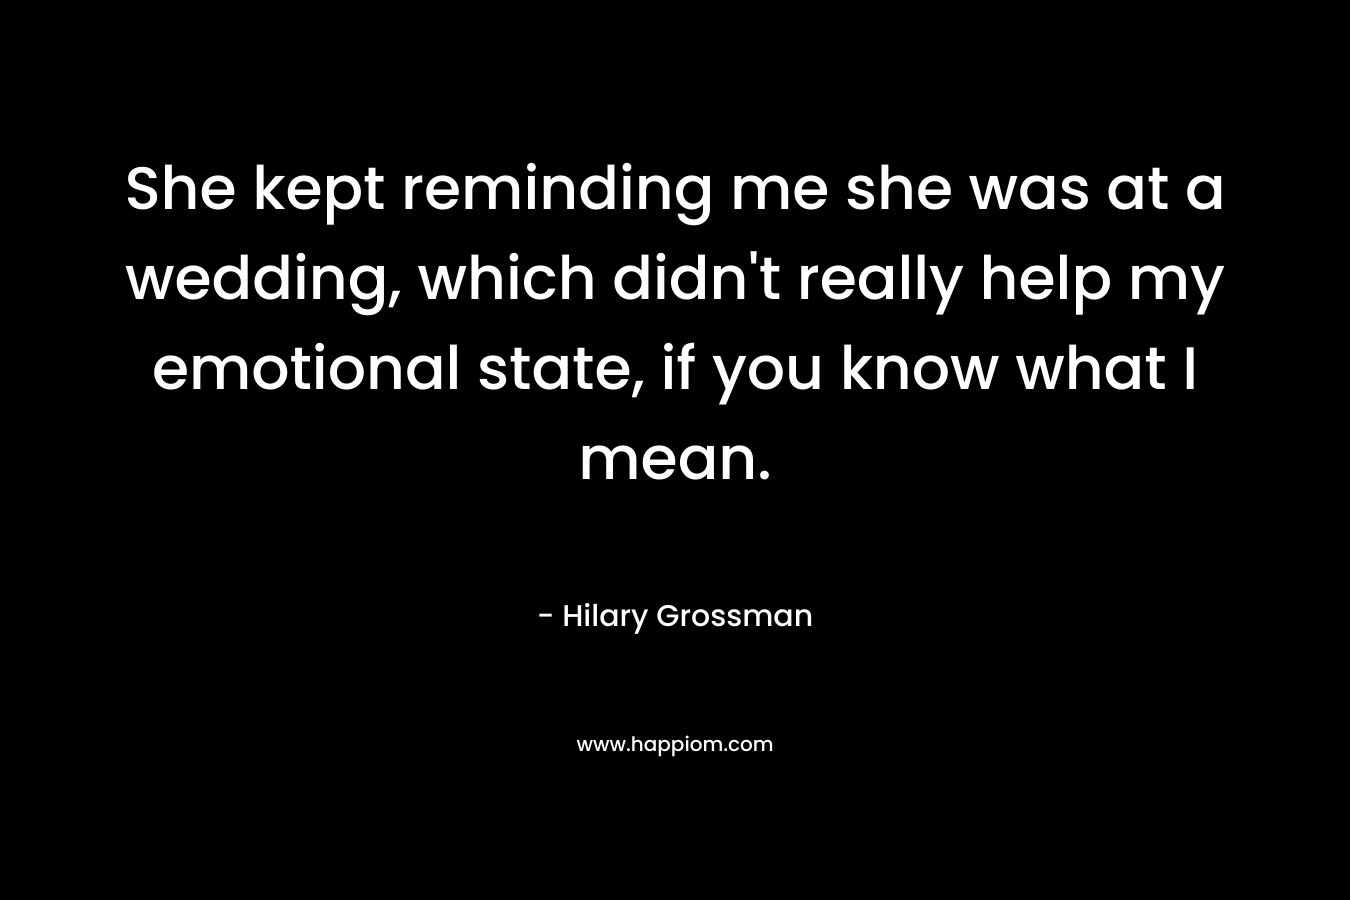 She kept reminding me she was at a wedding, which didn’t really help my emotional state, if you know what I mean. – Hilary Grossman